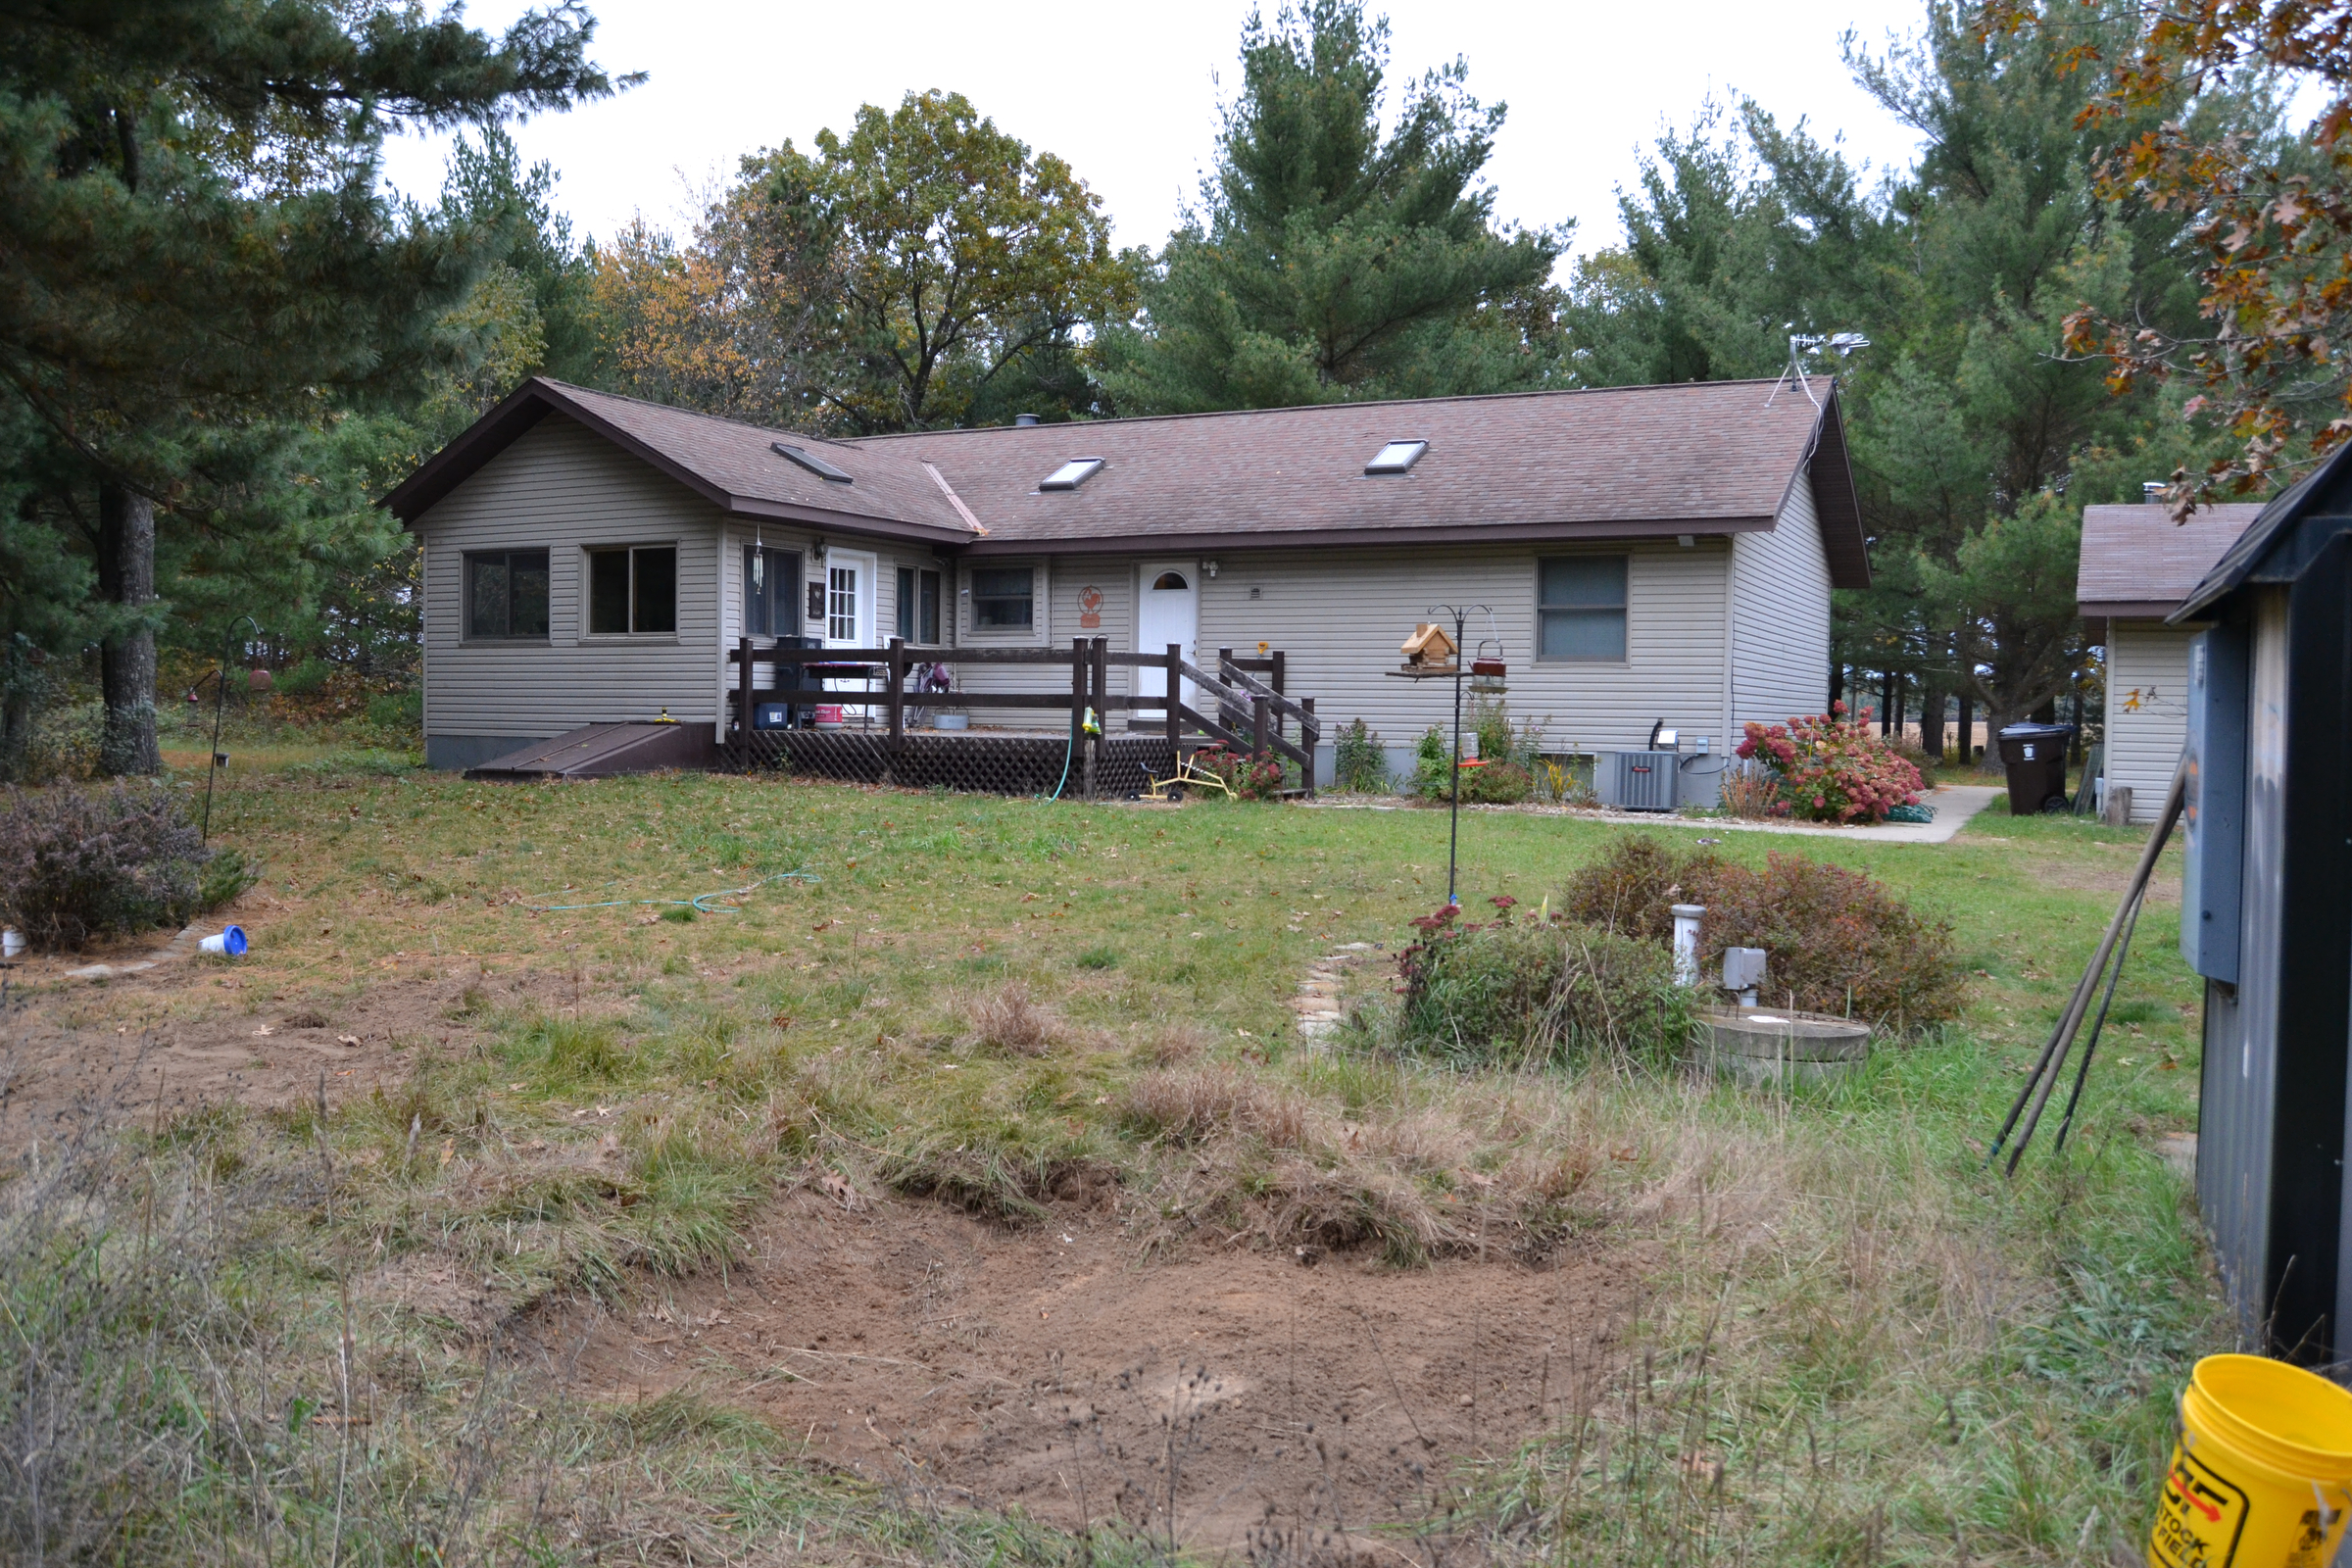 Zach Skrede's house is pictured that sits on 20 acres of contaminated land